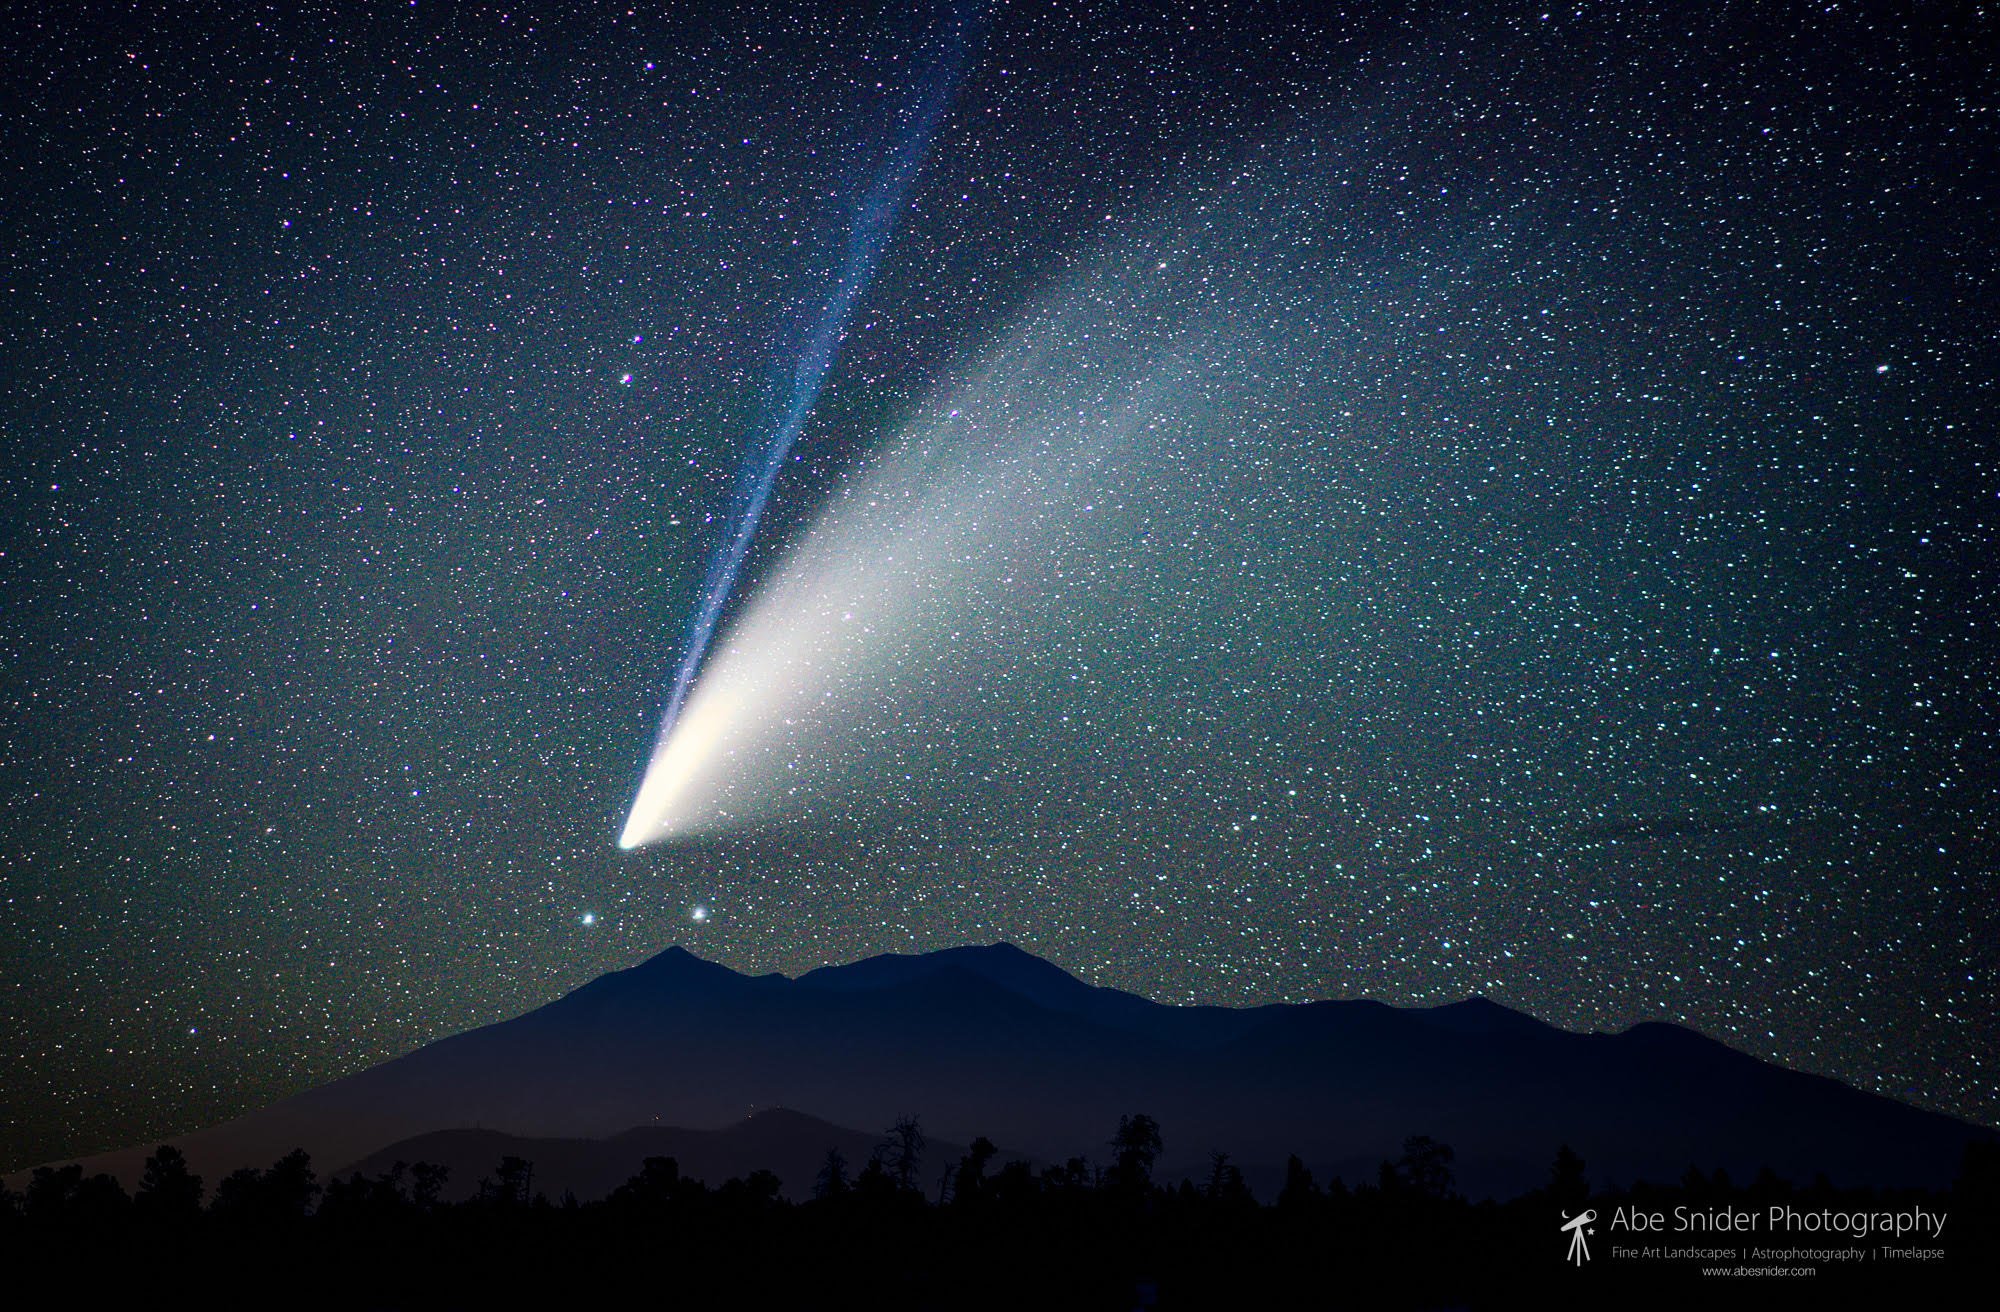 NEOWISE Seen above the San Francisco Peaks north of Flagstaff, AZ. Credit Abe Snider